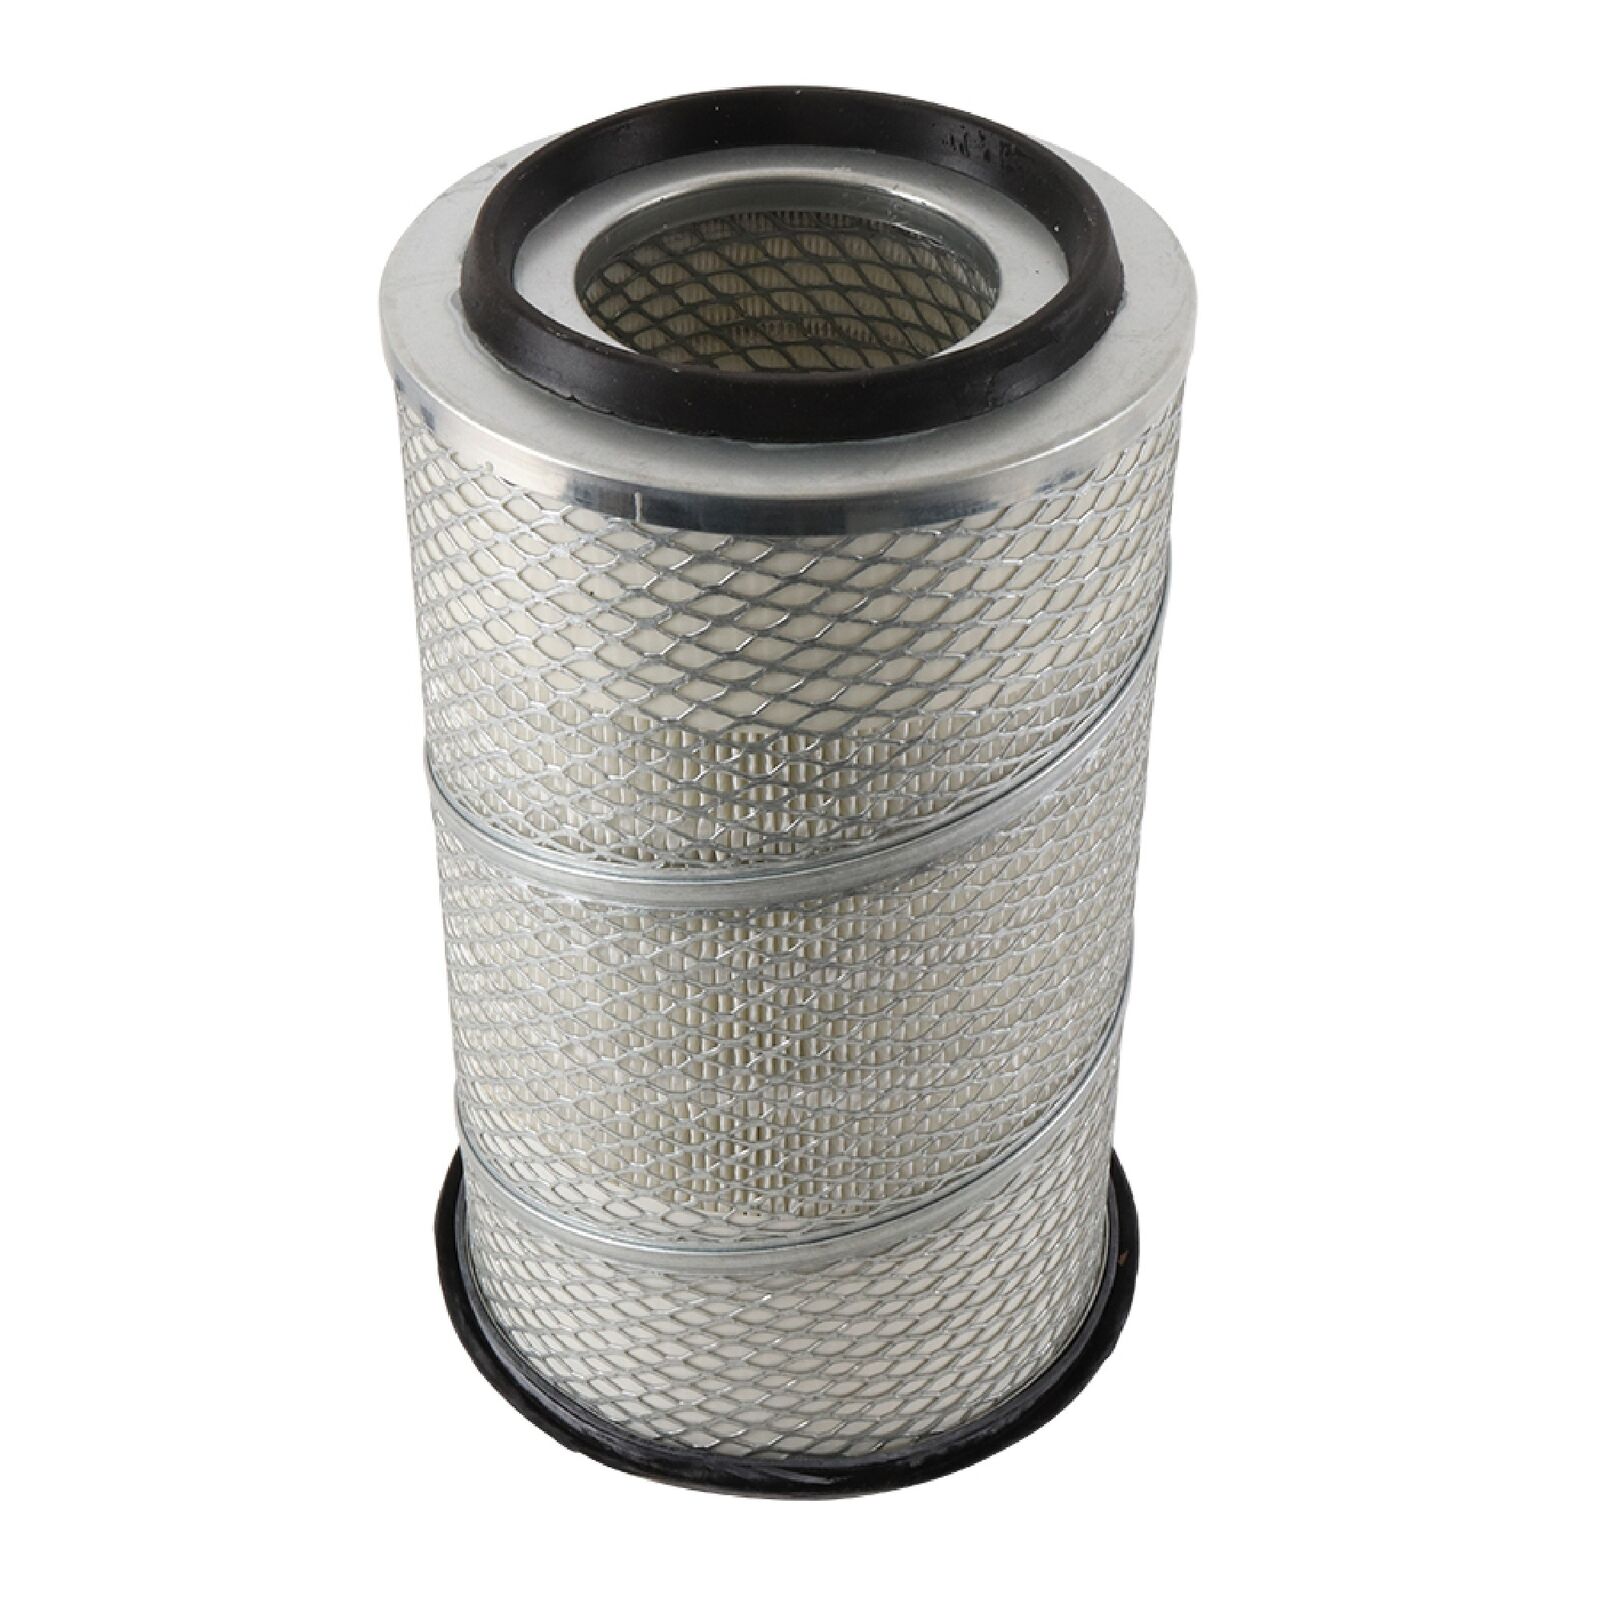 Air Filter for Ford New Holland 81863008 82003726 82008600 82011402 82027152